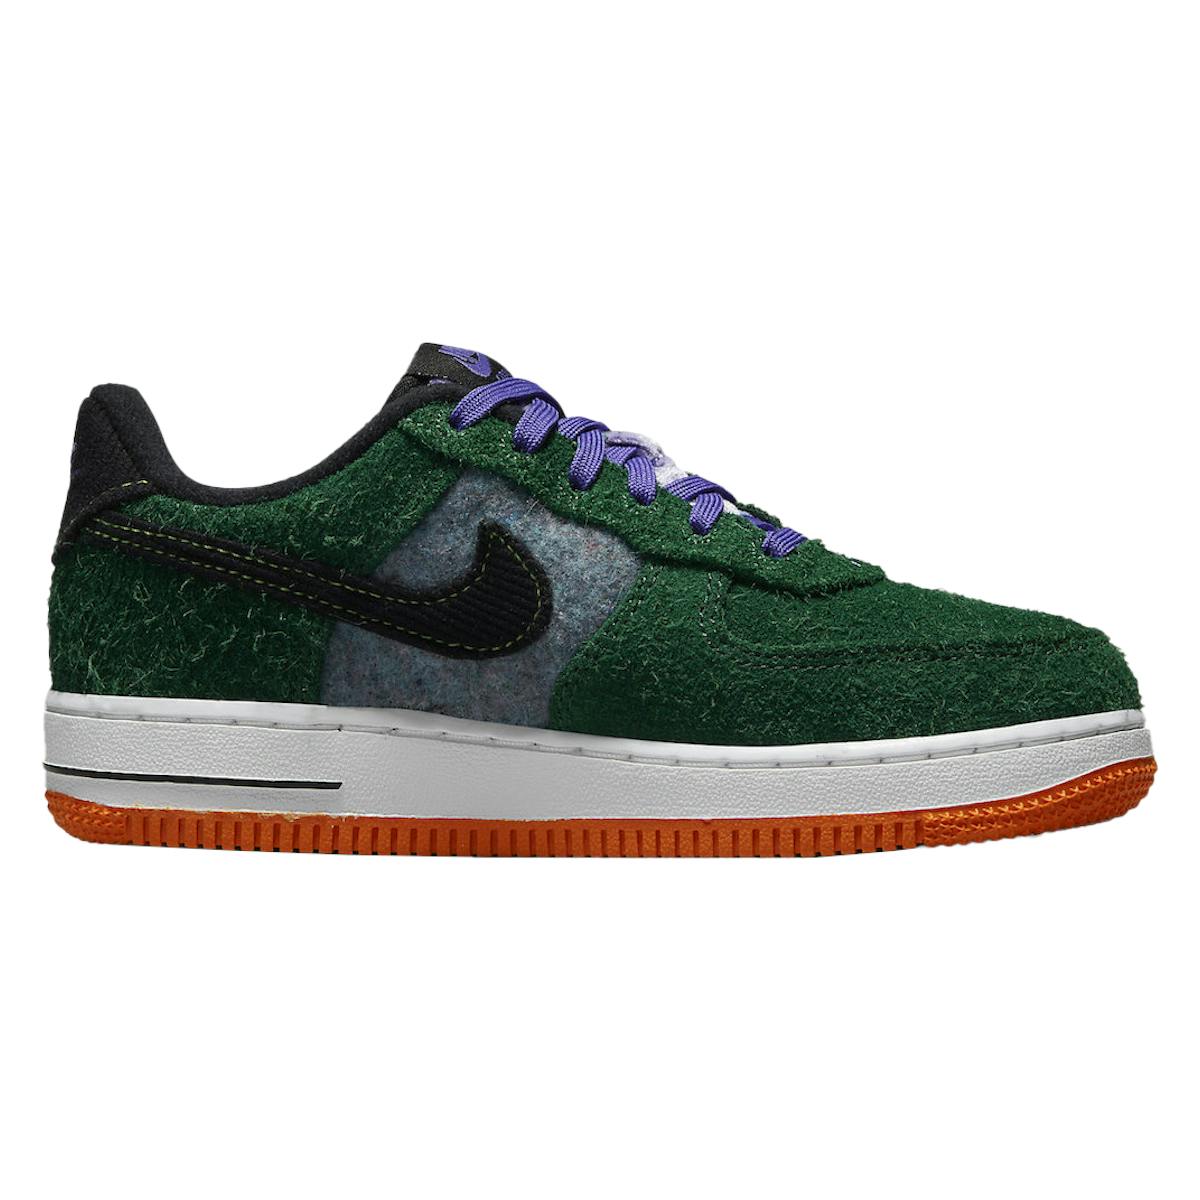 Nike Air Force 1 Low GS "Shaggy Green Suede"